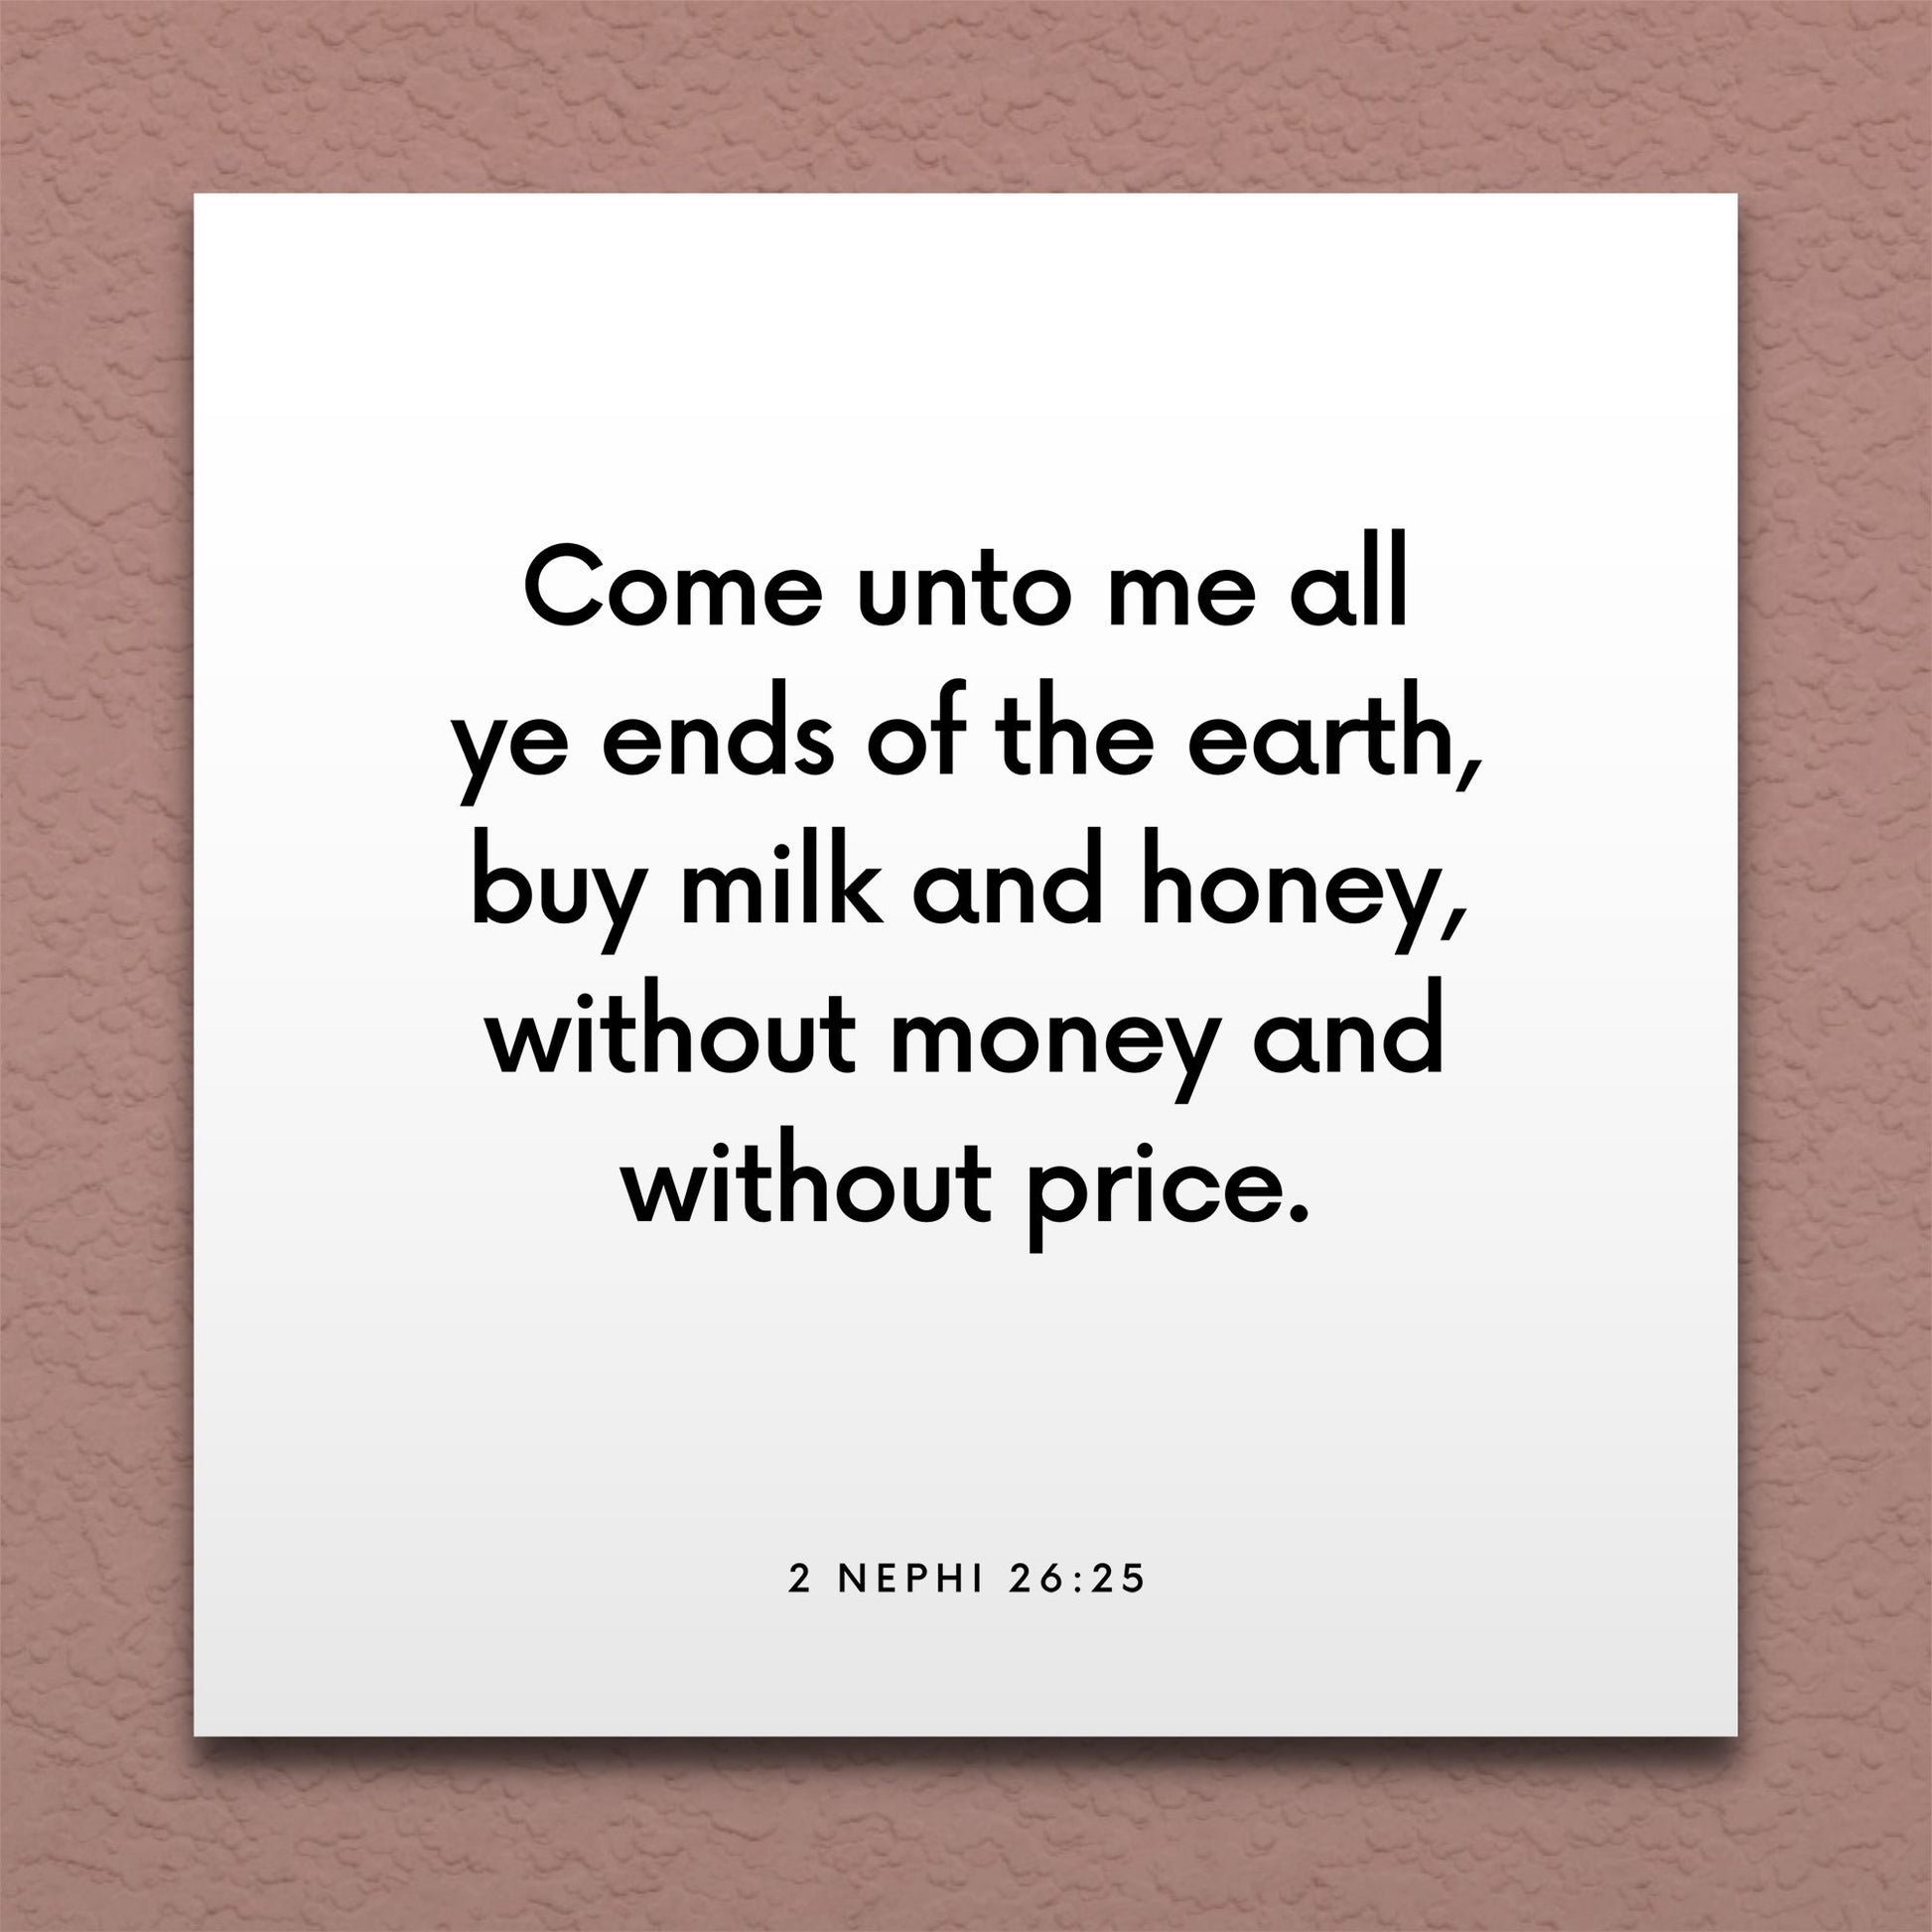 Wall-mounted scripture tile for 2 Nephi 26:25 - "Buy milk and honey, without money and without price"